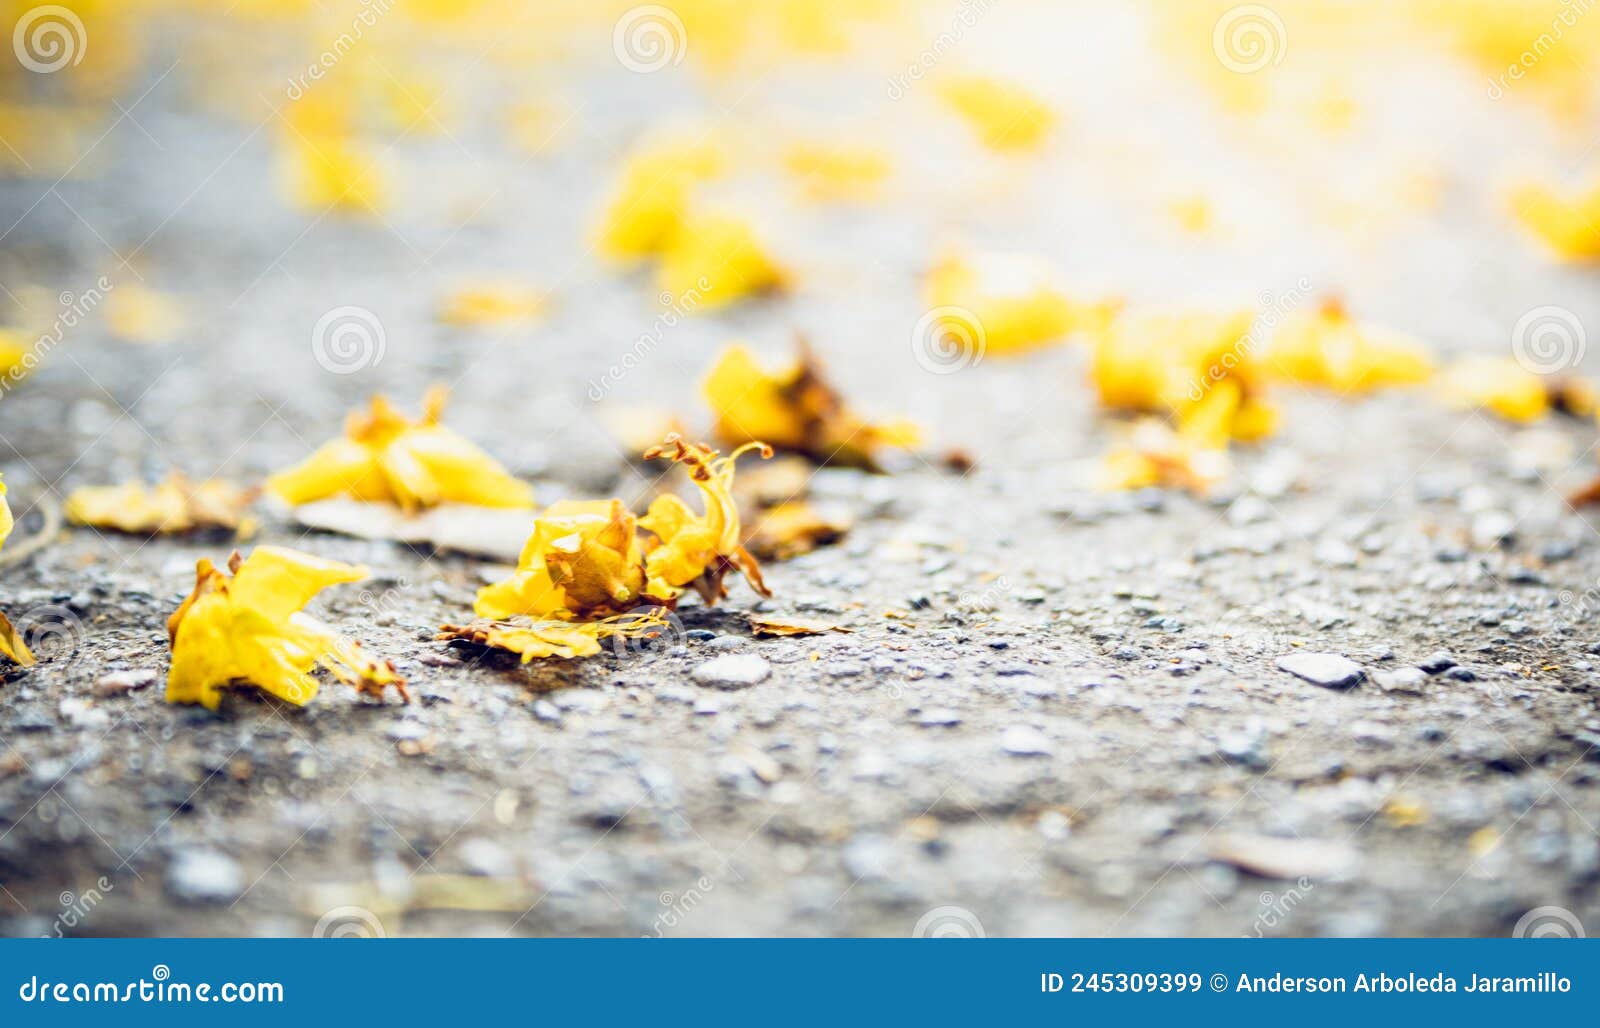 fallen leaves of tree on the road in autumn day